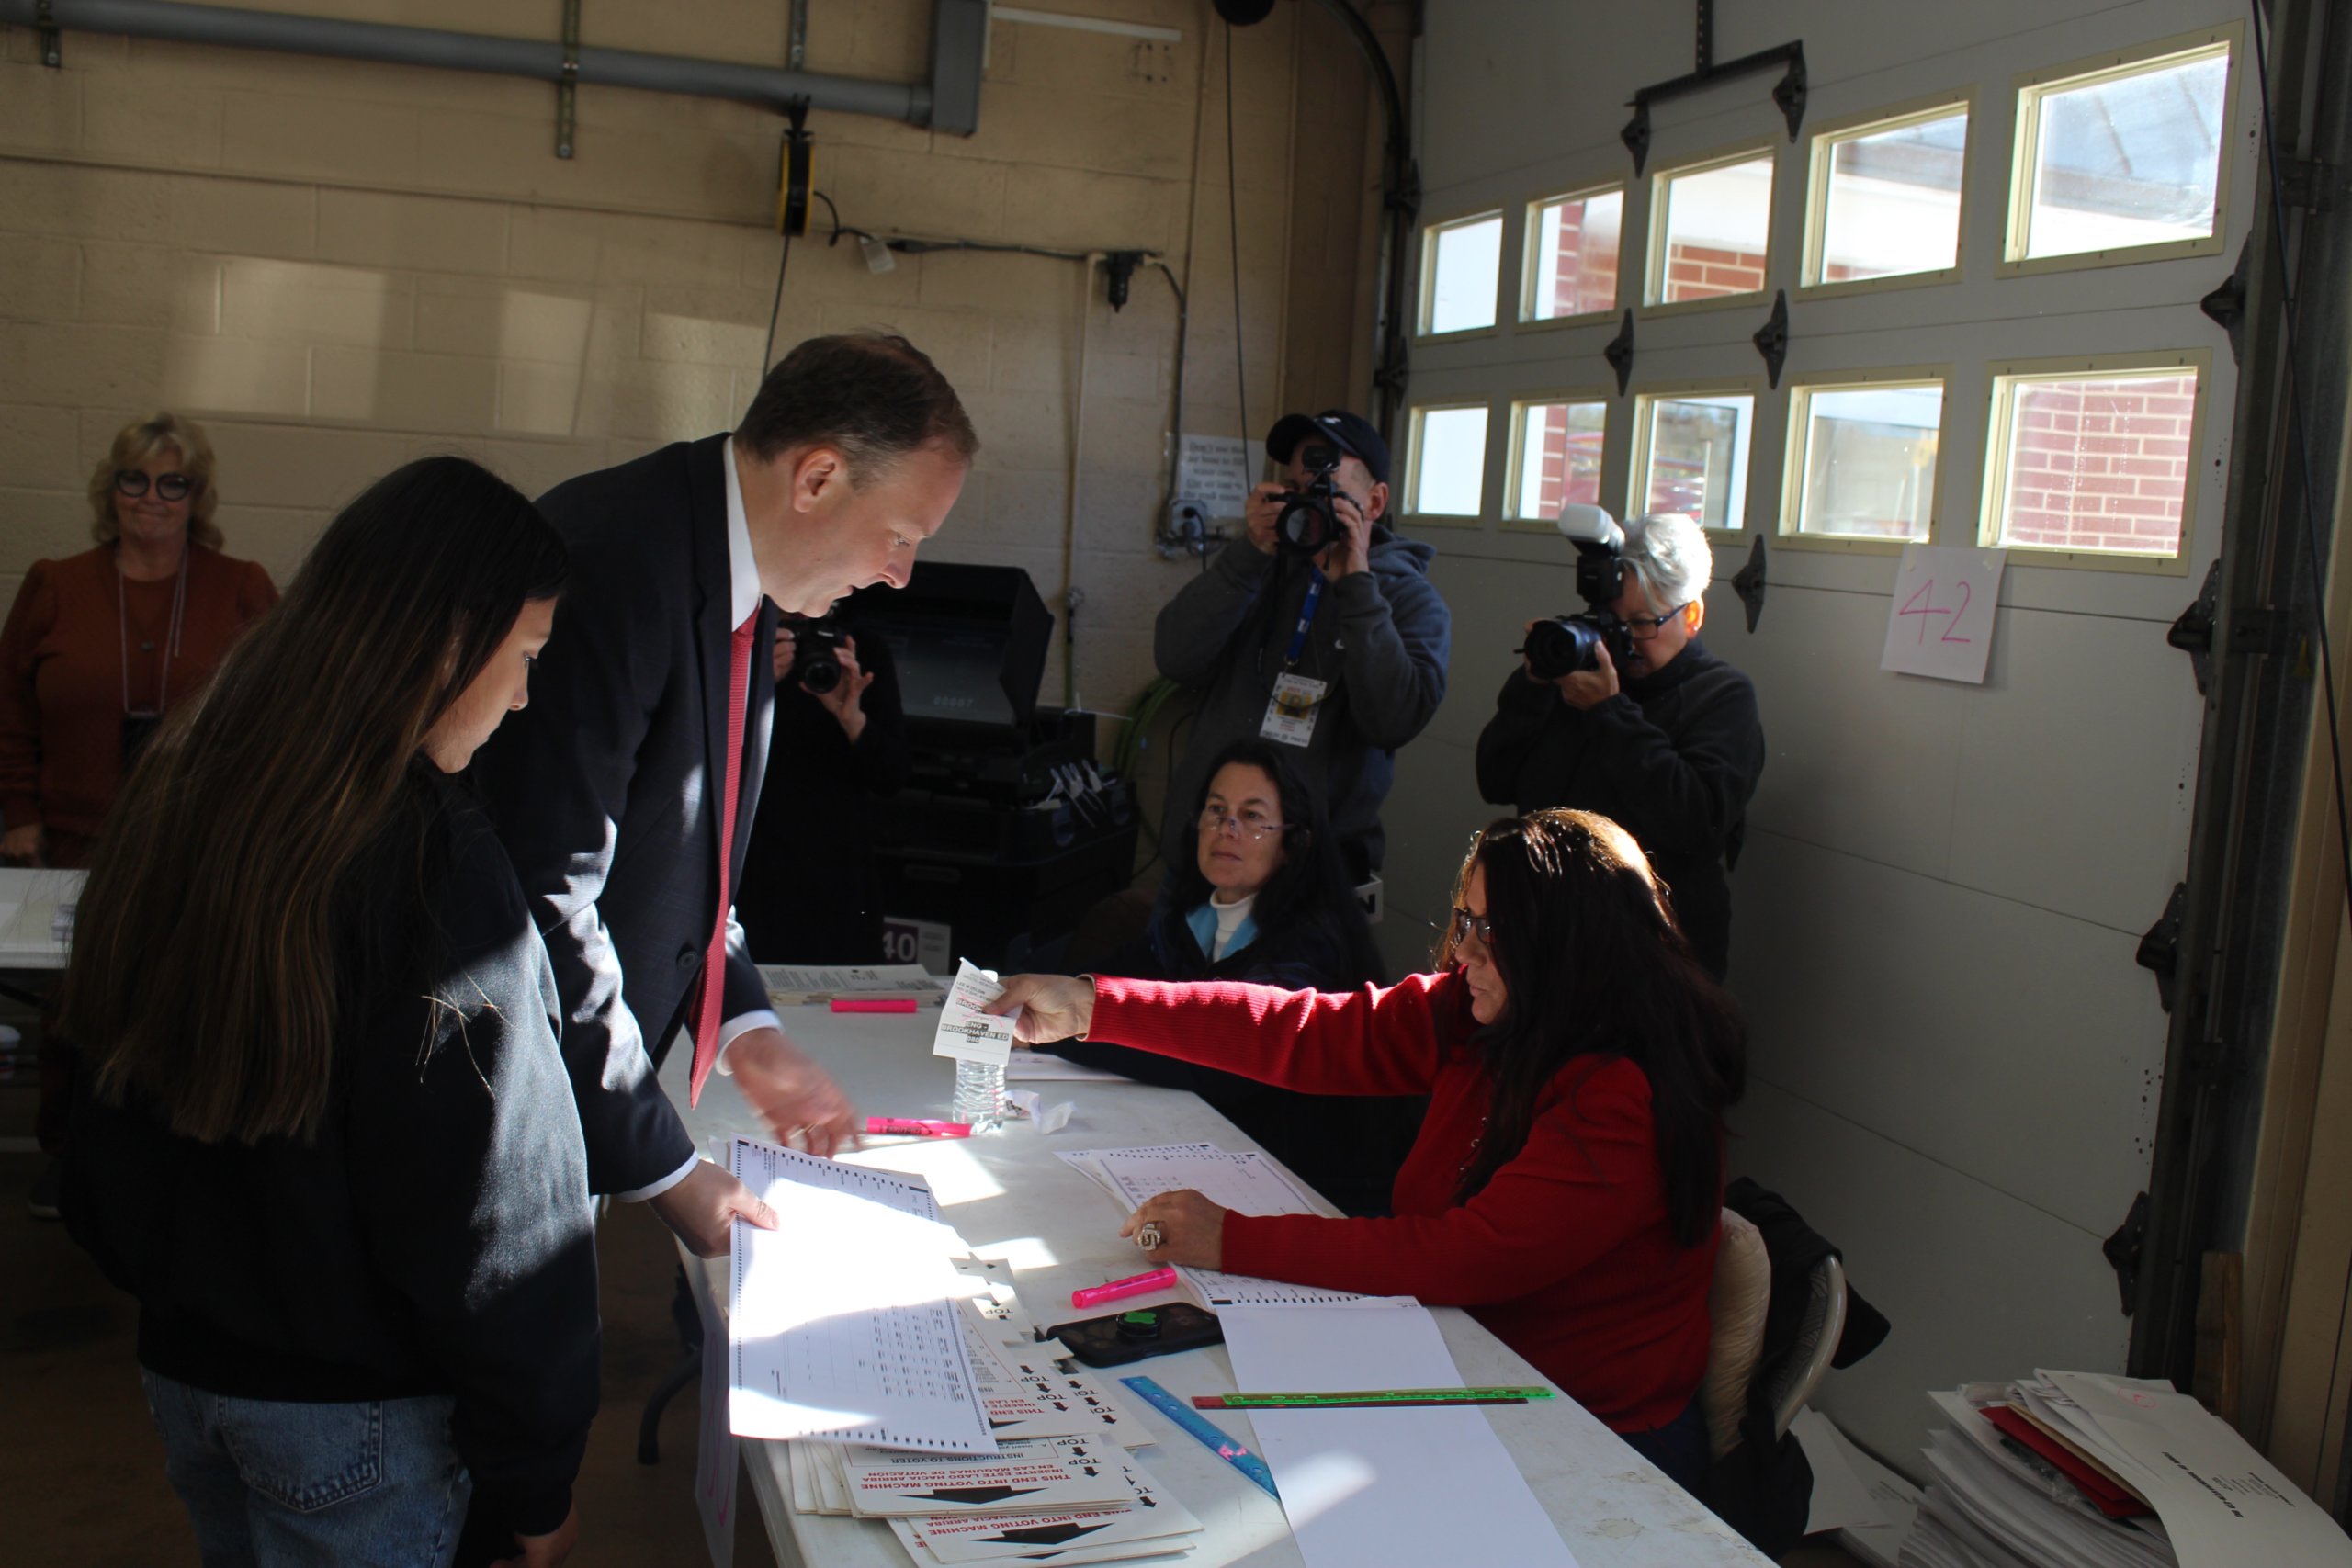 Lee Zeldin votes in Mastic on Election Day 2022